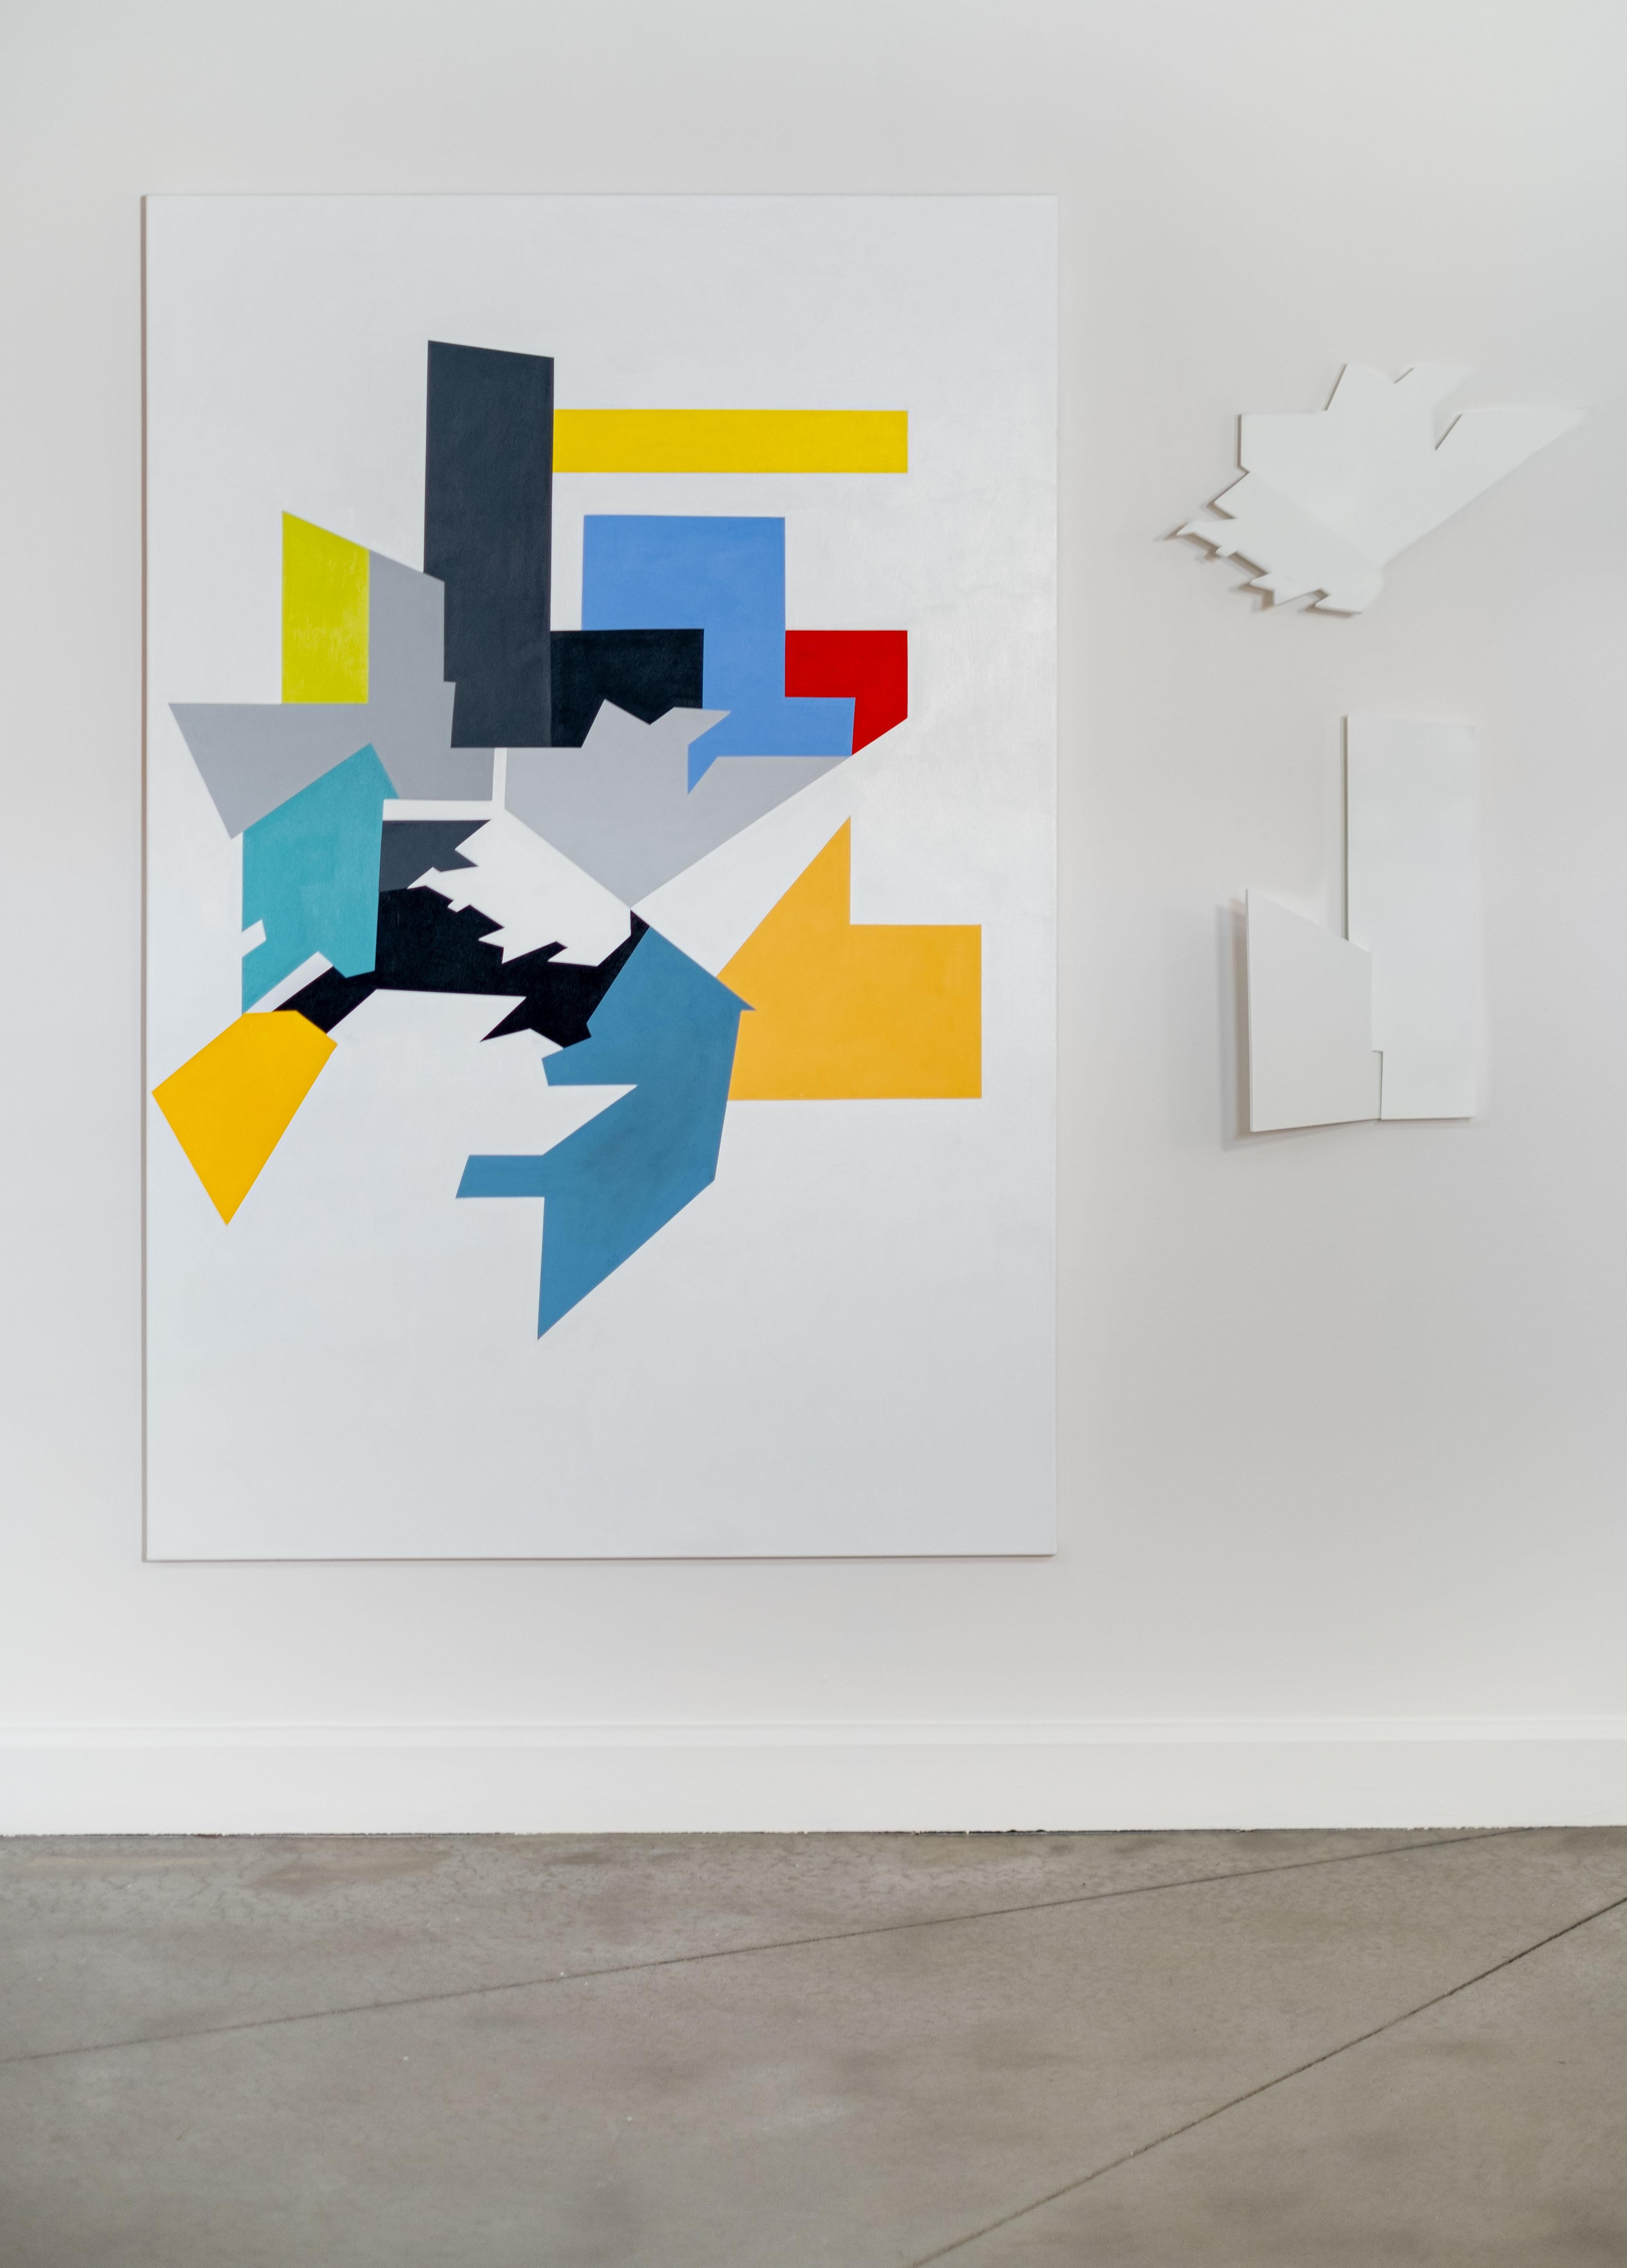 This wholly unique contemporary graphic painting and complimentary wall sculpture is by Yvonne Lammerich. The Canadian artist has acquired an international reputation for her inspired and thought-provoking modern artwork that often includes